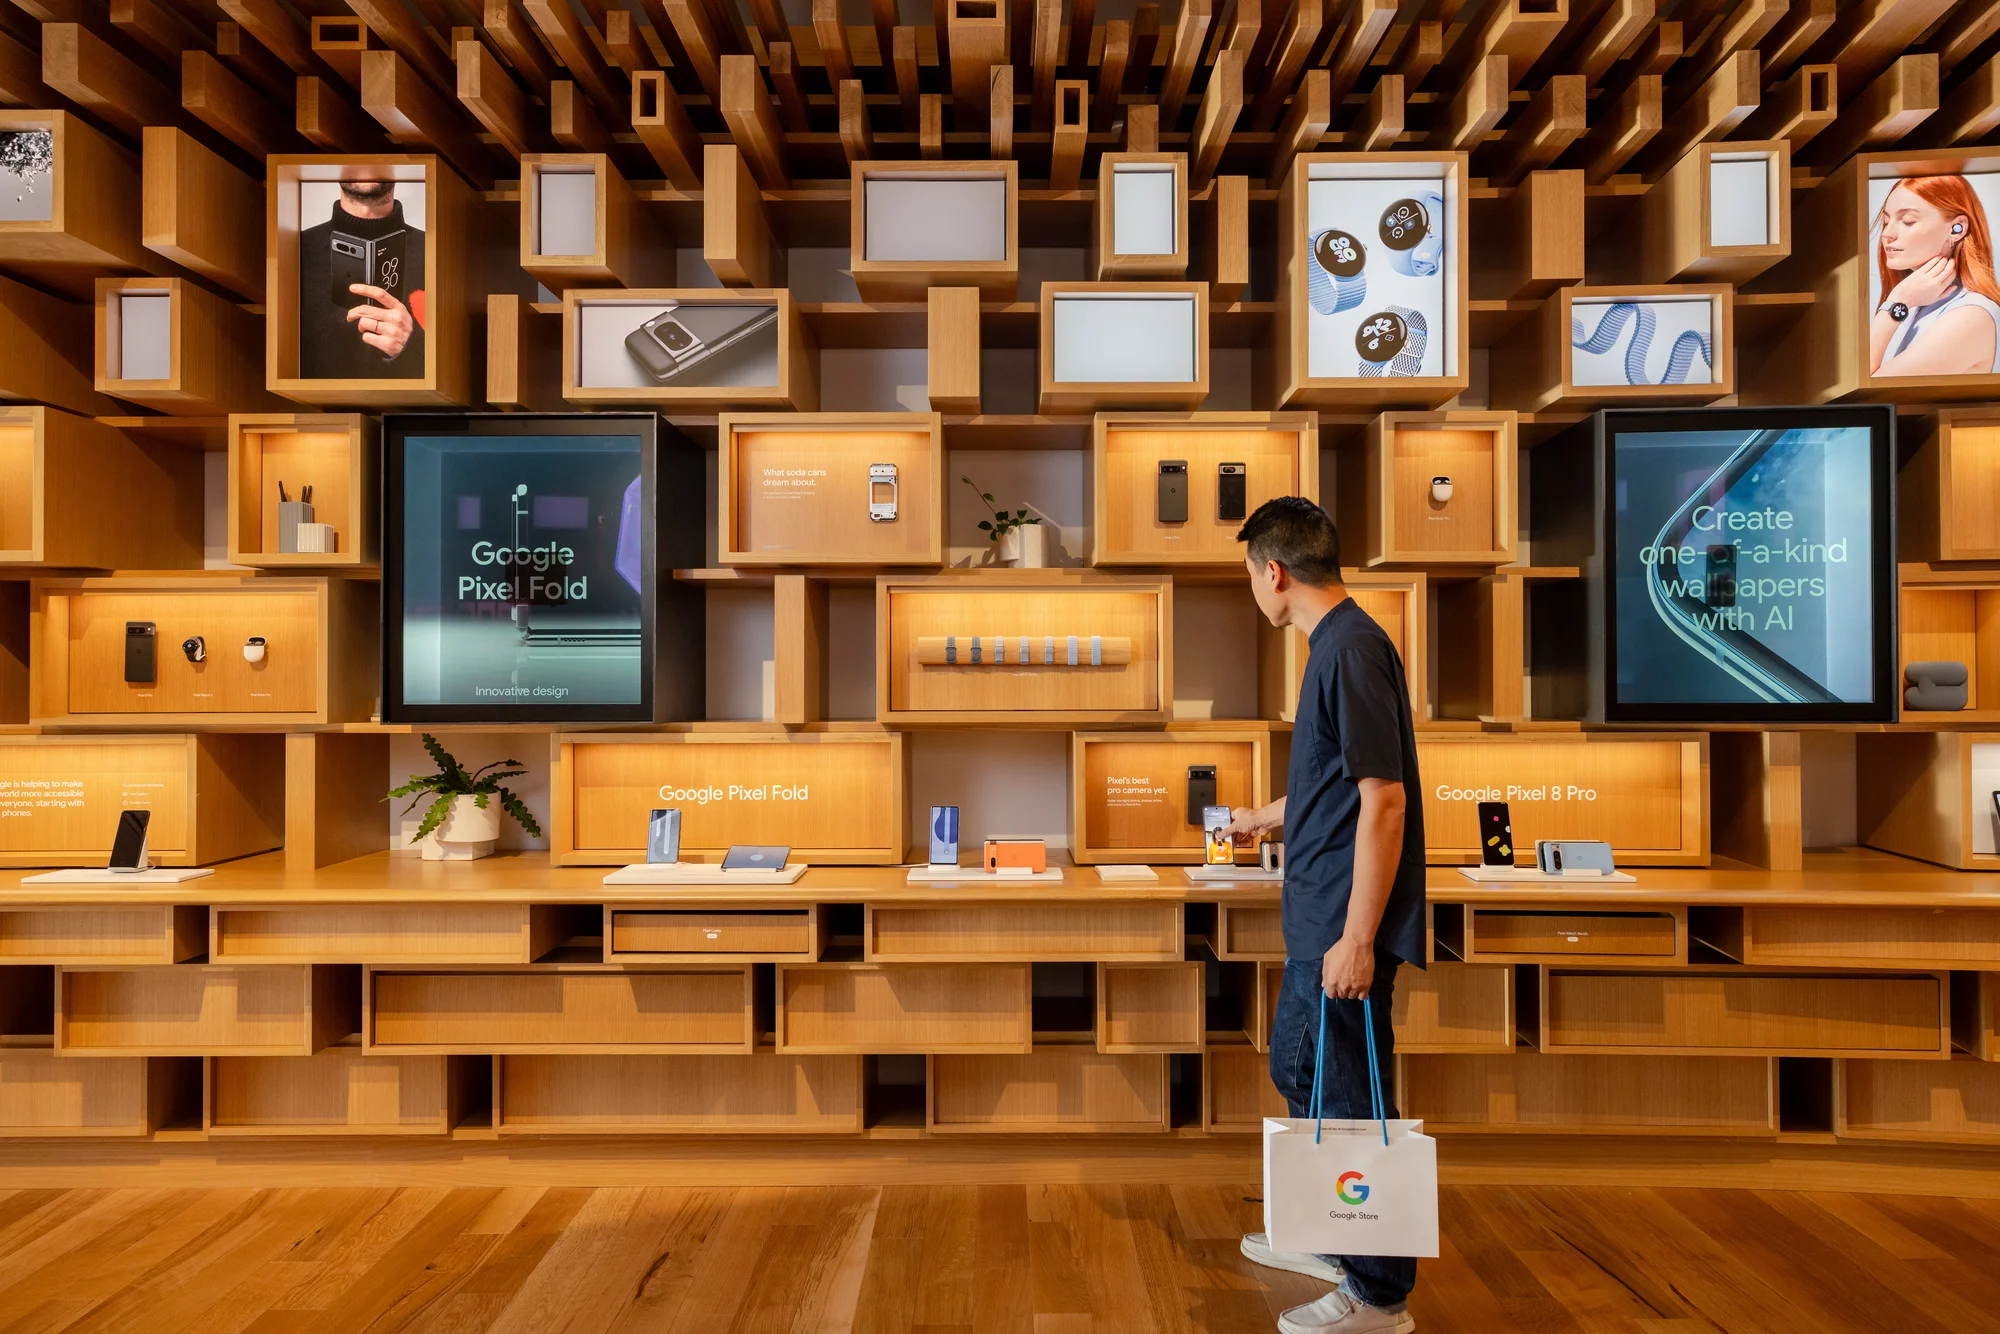 A photo of the interior of the Google Store with a man looking at the Google hardware that's displayed, and he is holding a shopping bag with a Google "G" on it.